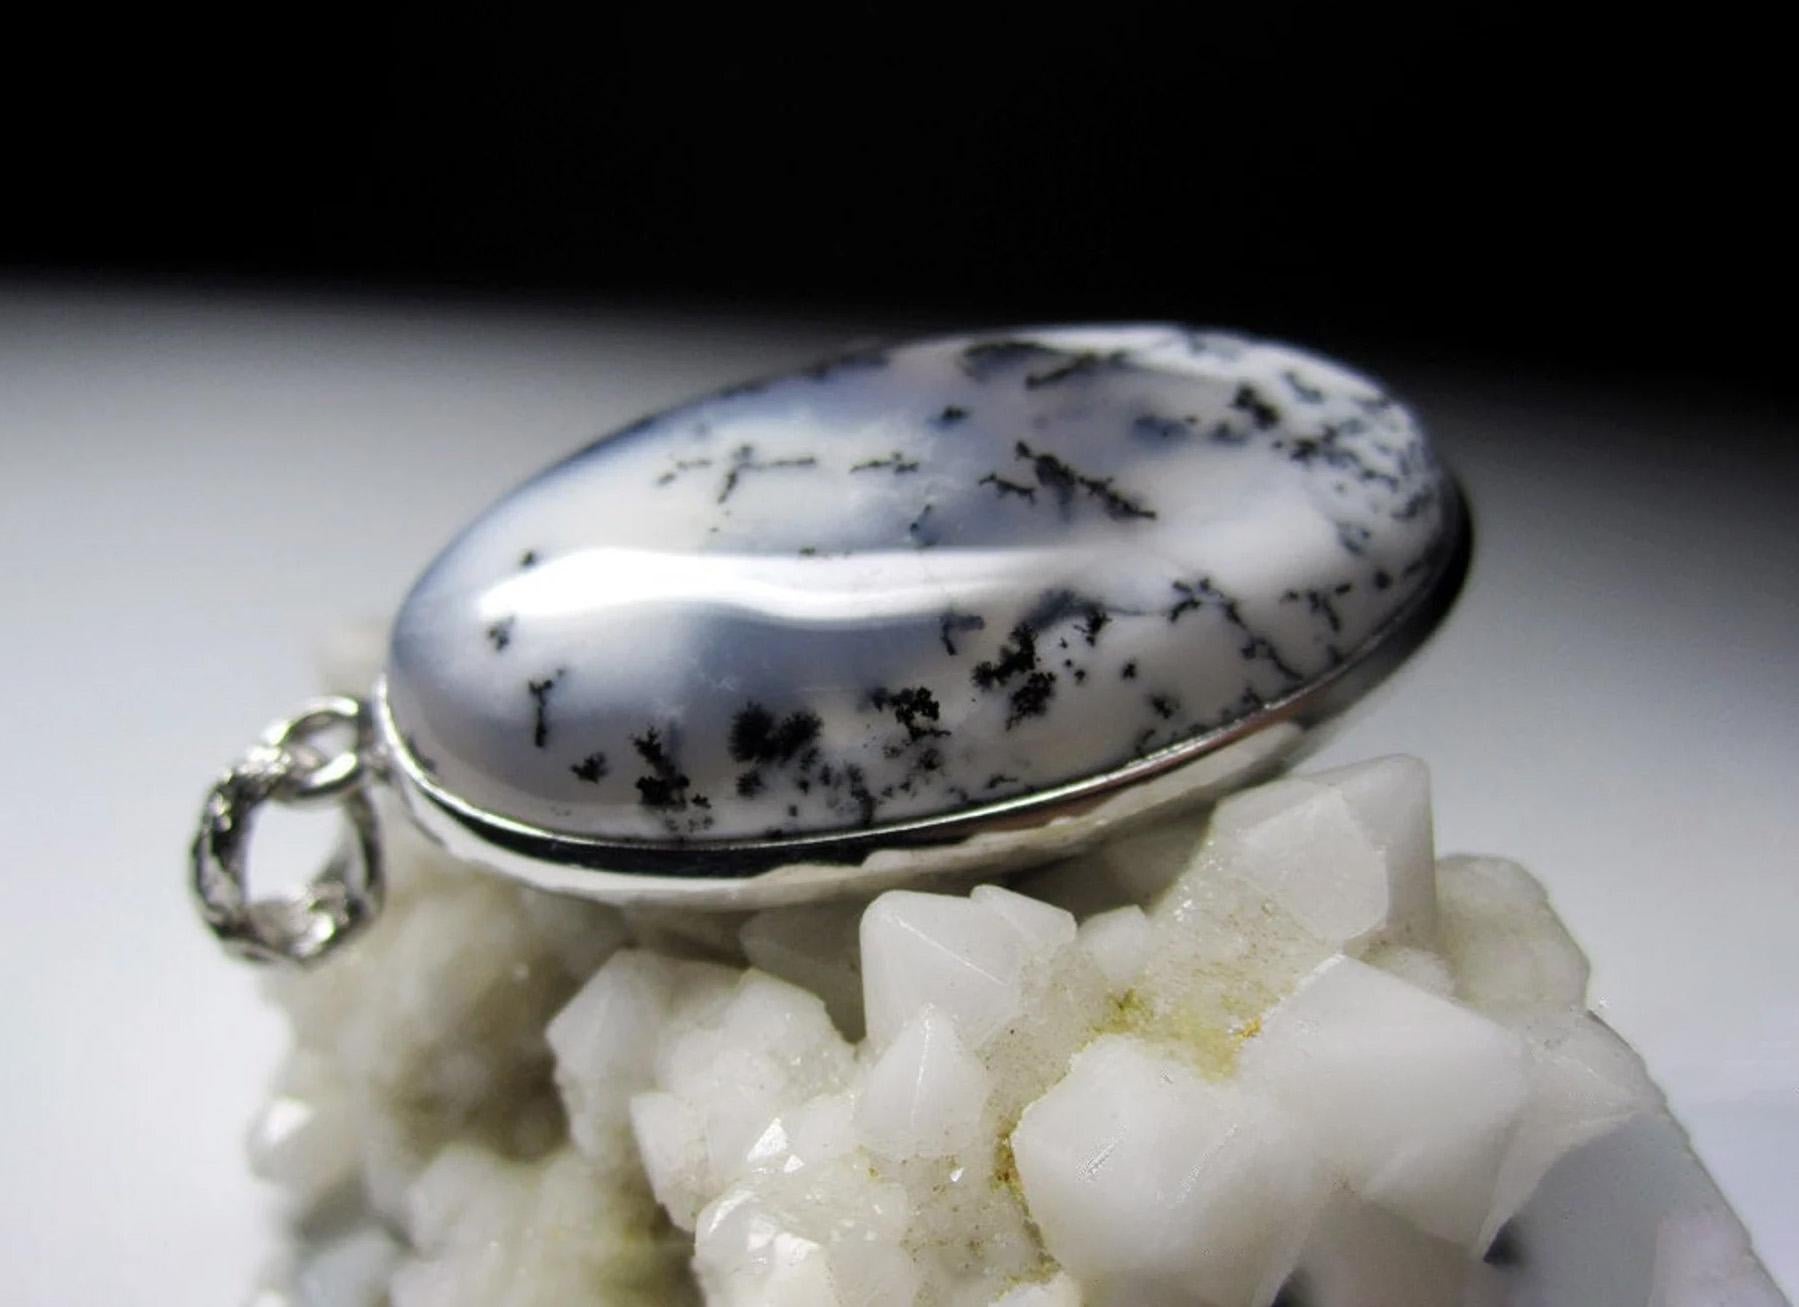 Silver pendant with natural moss Agate 
gemstone origin - Brazil
gem size is 0.24 х 0.79 х 1.46 in / 6 х 20 х 37 mm
pendant  weight - 12.11 grams
pendant length - 2.01 in / 51 mm